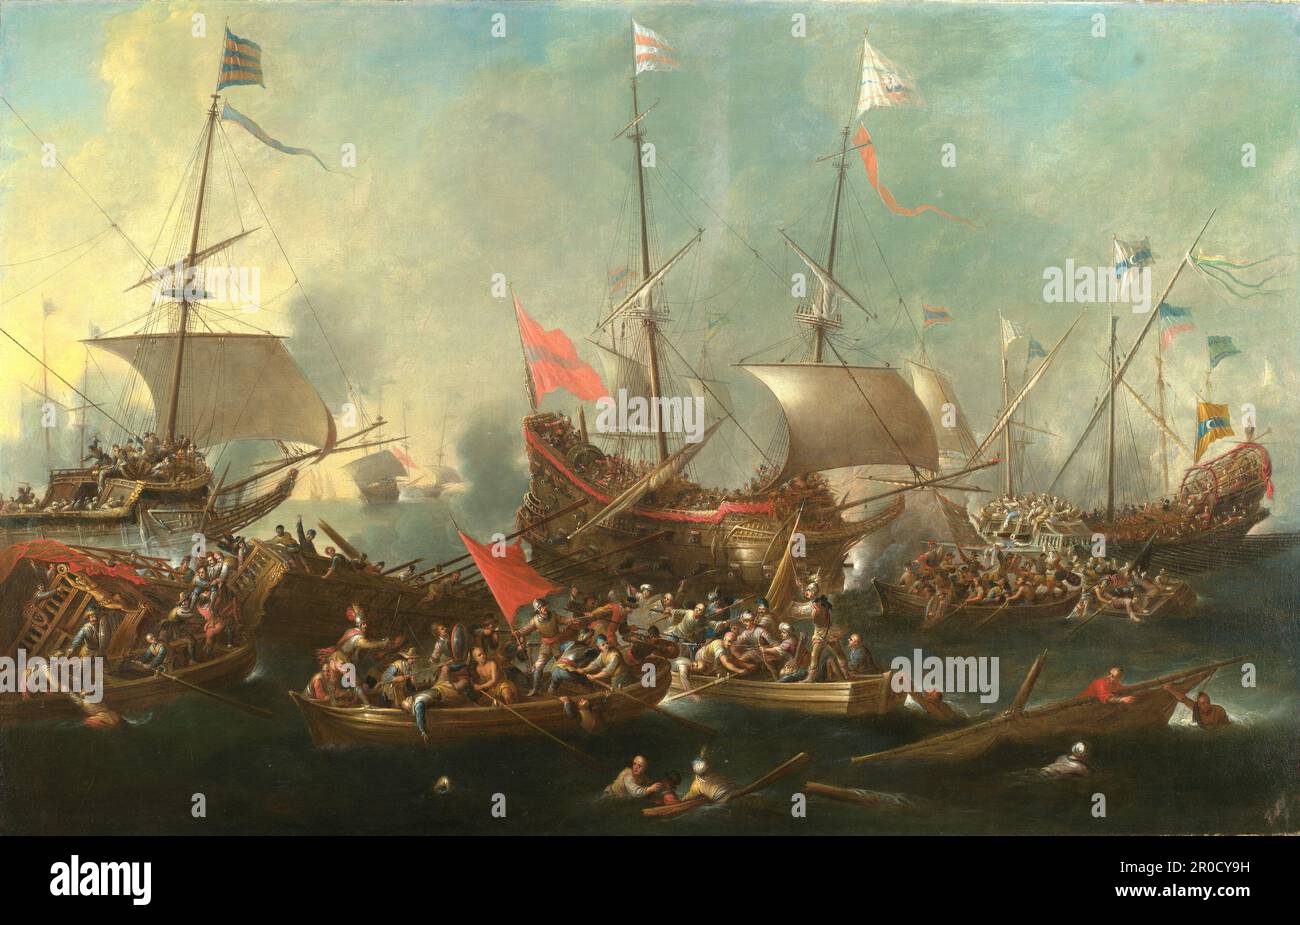 The Battle of Lepanto - A Sea Battle between Christians and Barbary Corsairs, 1615-20. Artist: Andries van Eertvelt.. The Battle of Lepanto was fought between the Holy League, a coalition of Catholic Mediterranean states, and the Turkish Ottoman Empire on 7th October 1571. The Holy League force, led by Don Juan de Austria (1547-78), were victorious against the Ottoman force including Barbary Corsairs led by Muezzinzade Ali Pasha. This was the last great sea battle involving oared vessels and the largest battle of galleys since Actium in 30BC. Stock Photo